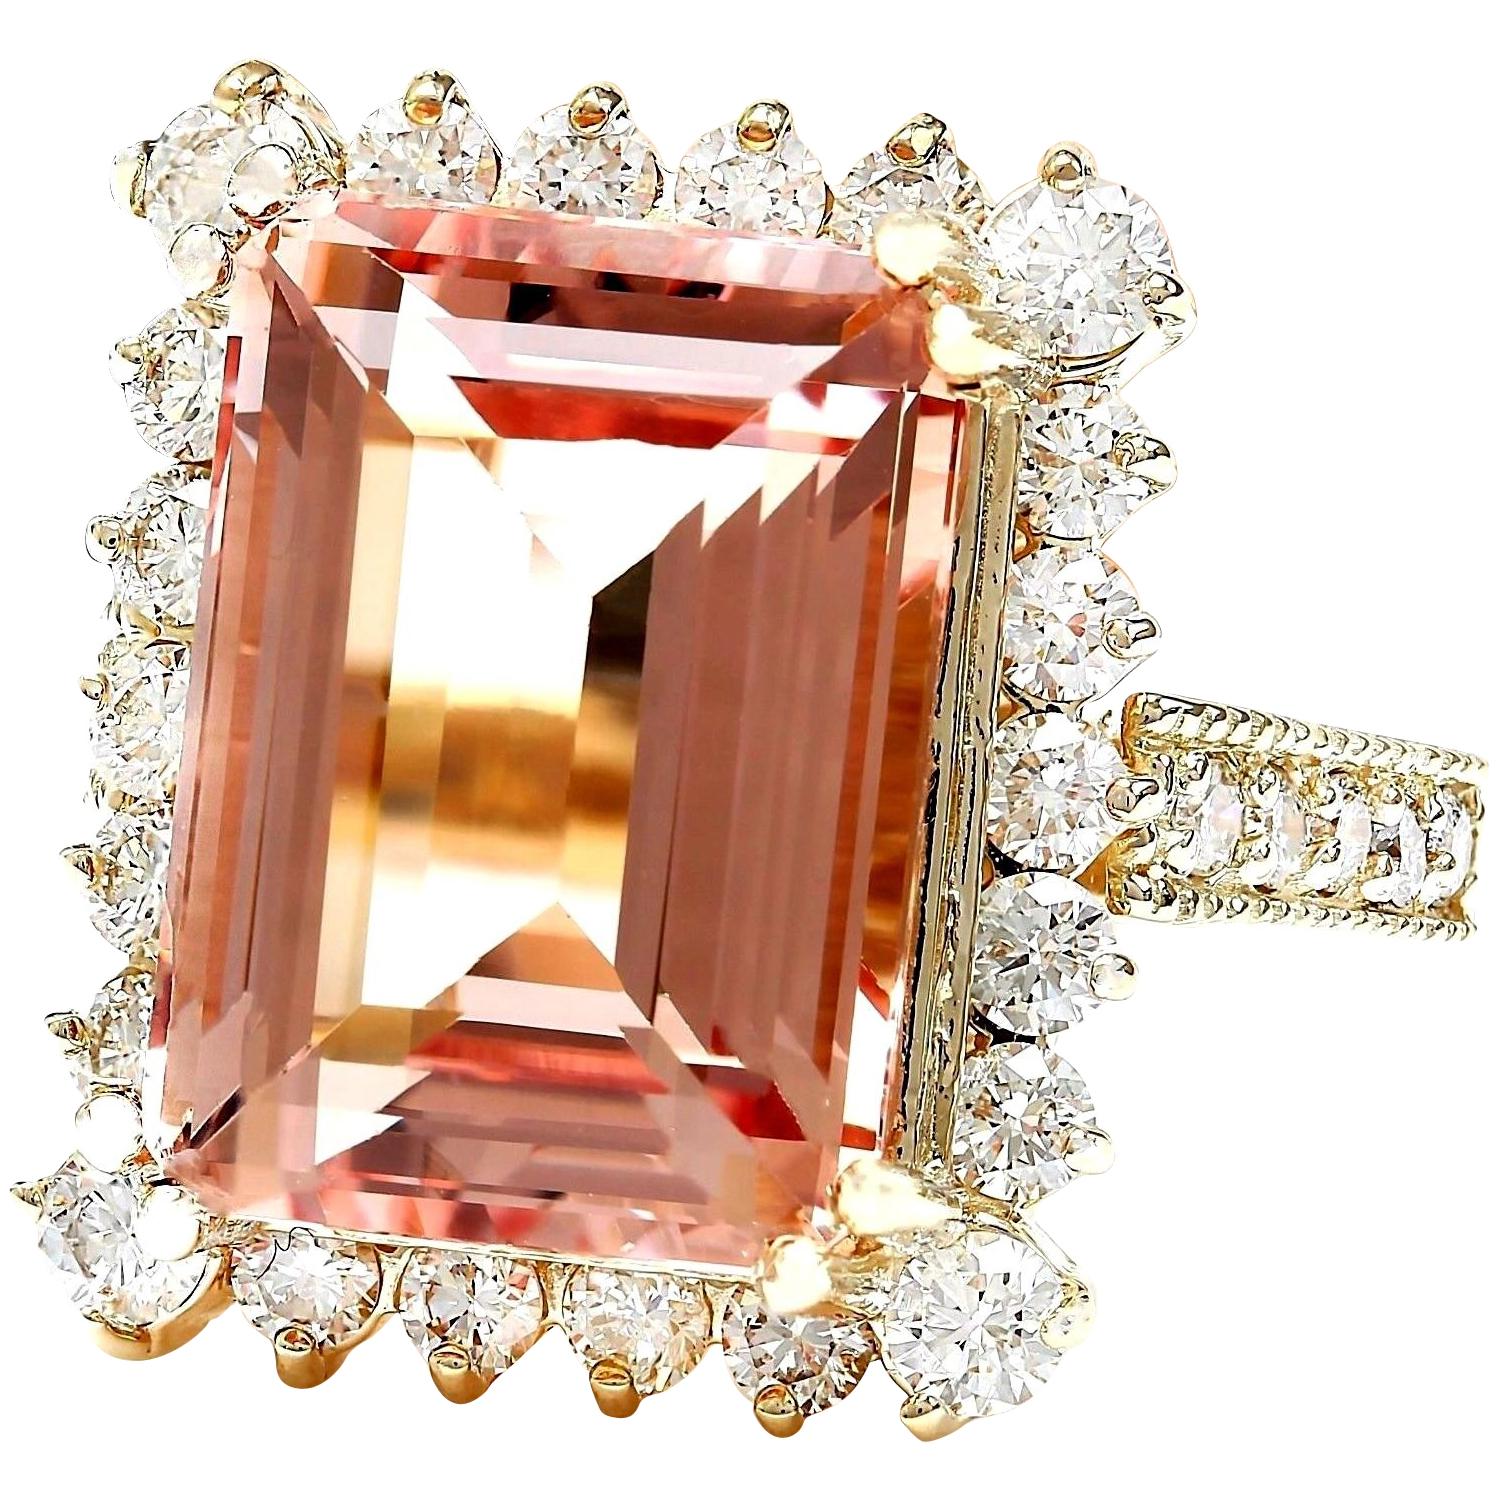 Introducing our exquisite 11.29 Carat Natural Morganite 14K Solid Yellow Gold Diamond Ring, a captivating blend of luxury and elegance. Crafted from authentic 14K Yellow Gold, this ring weighs 5.5 grams, ensuring both quality and durability. At its